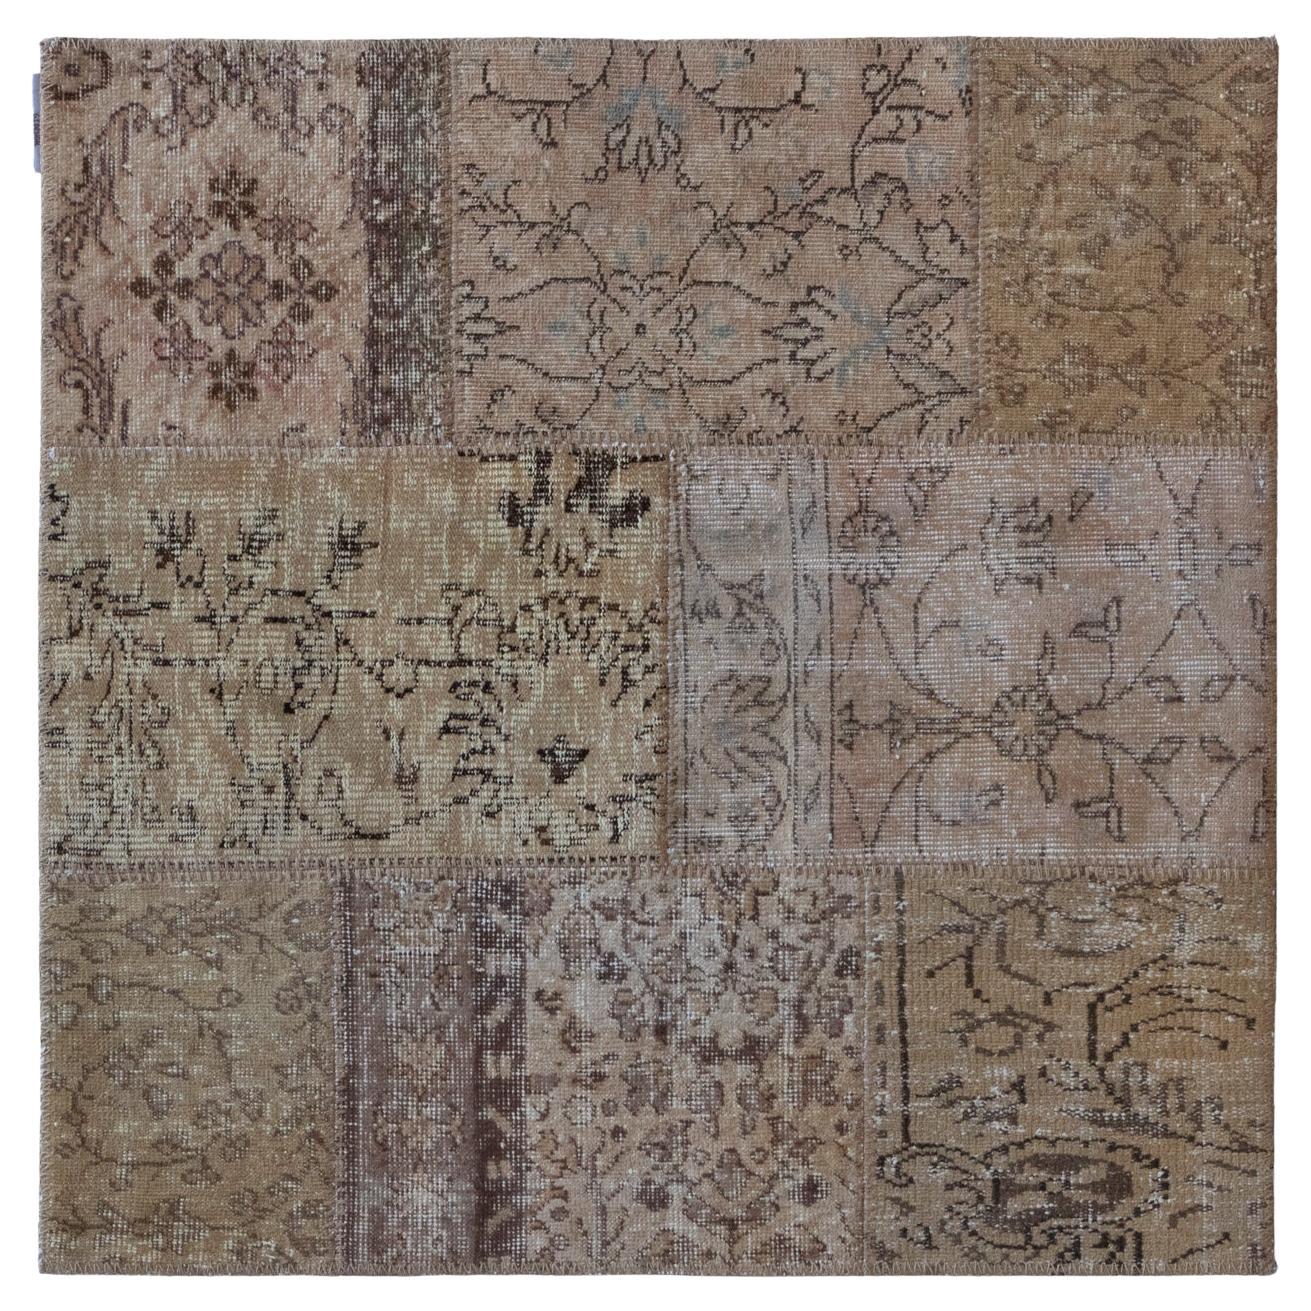 Nature Inspired Motifs Wool Cotton Rug by Deanna Comellini 120x120 cm For Sale